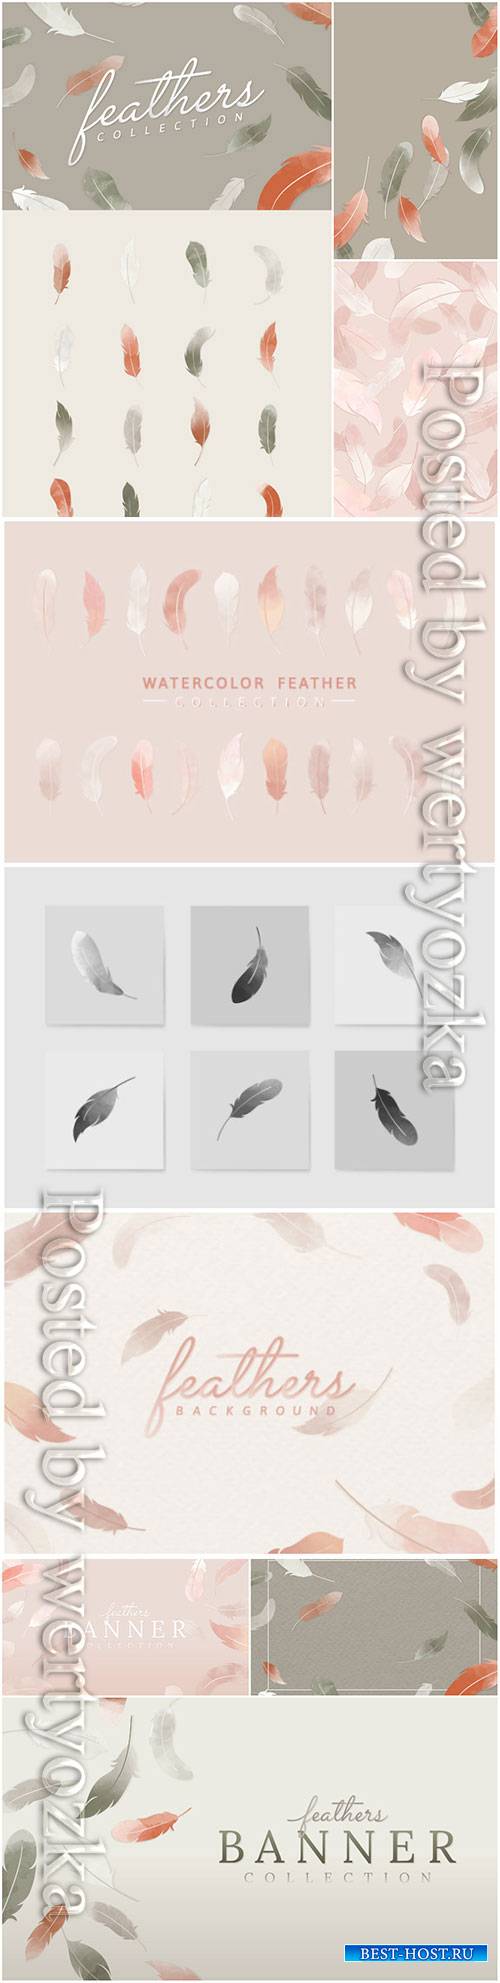 Floating feathers banner vector set